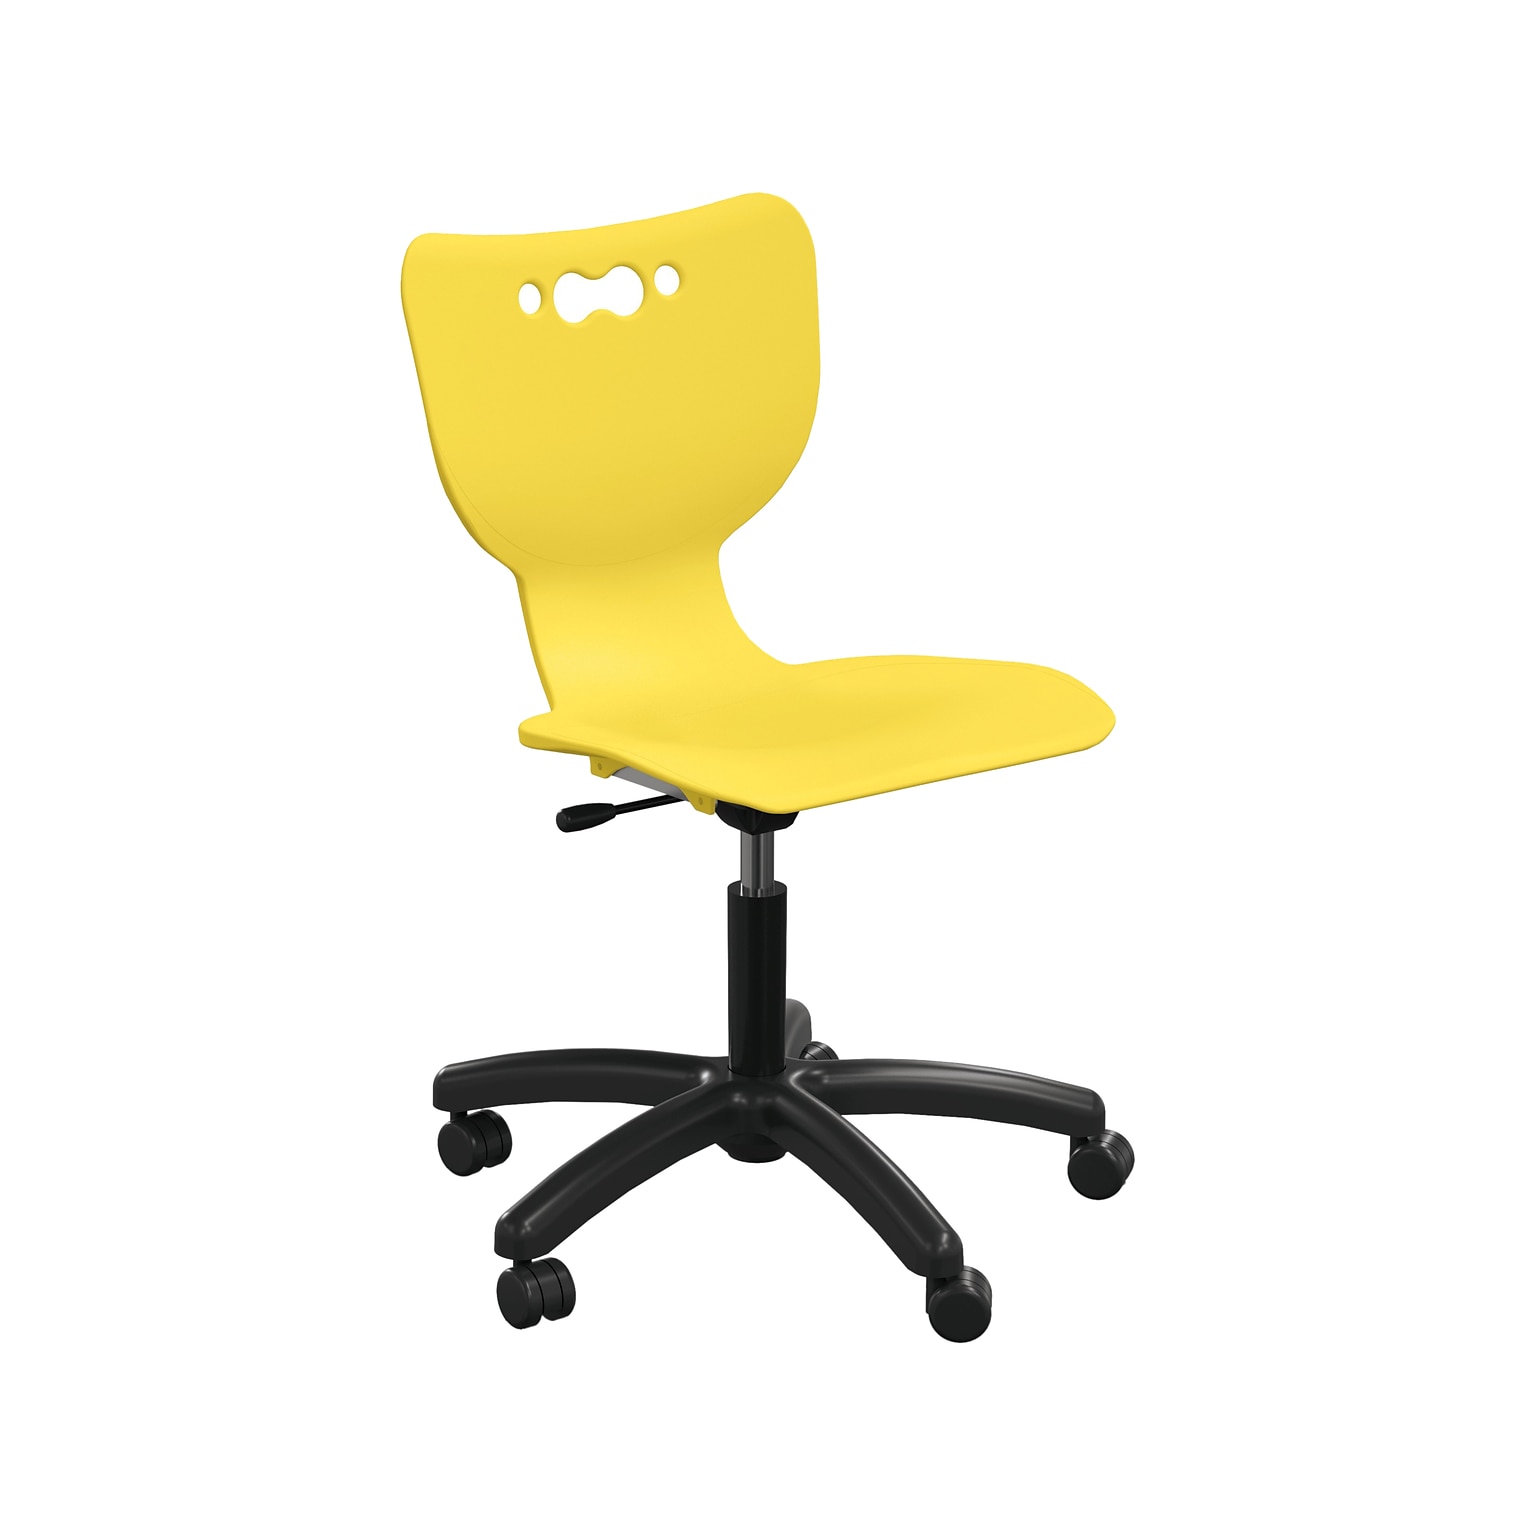 MooreCo Hierarchy 5-Star Plastic School Chair, Yellow (53512-YELLOW-NA-HC)